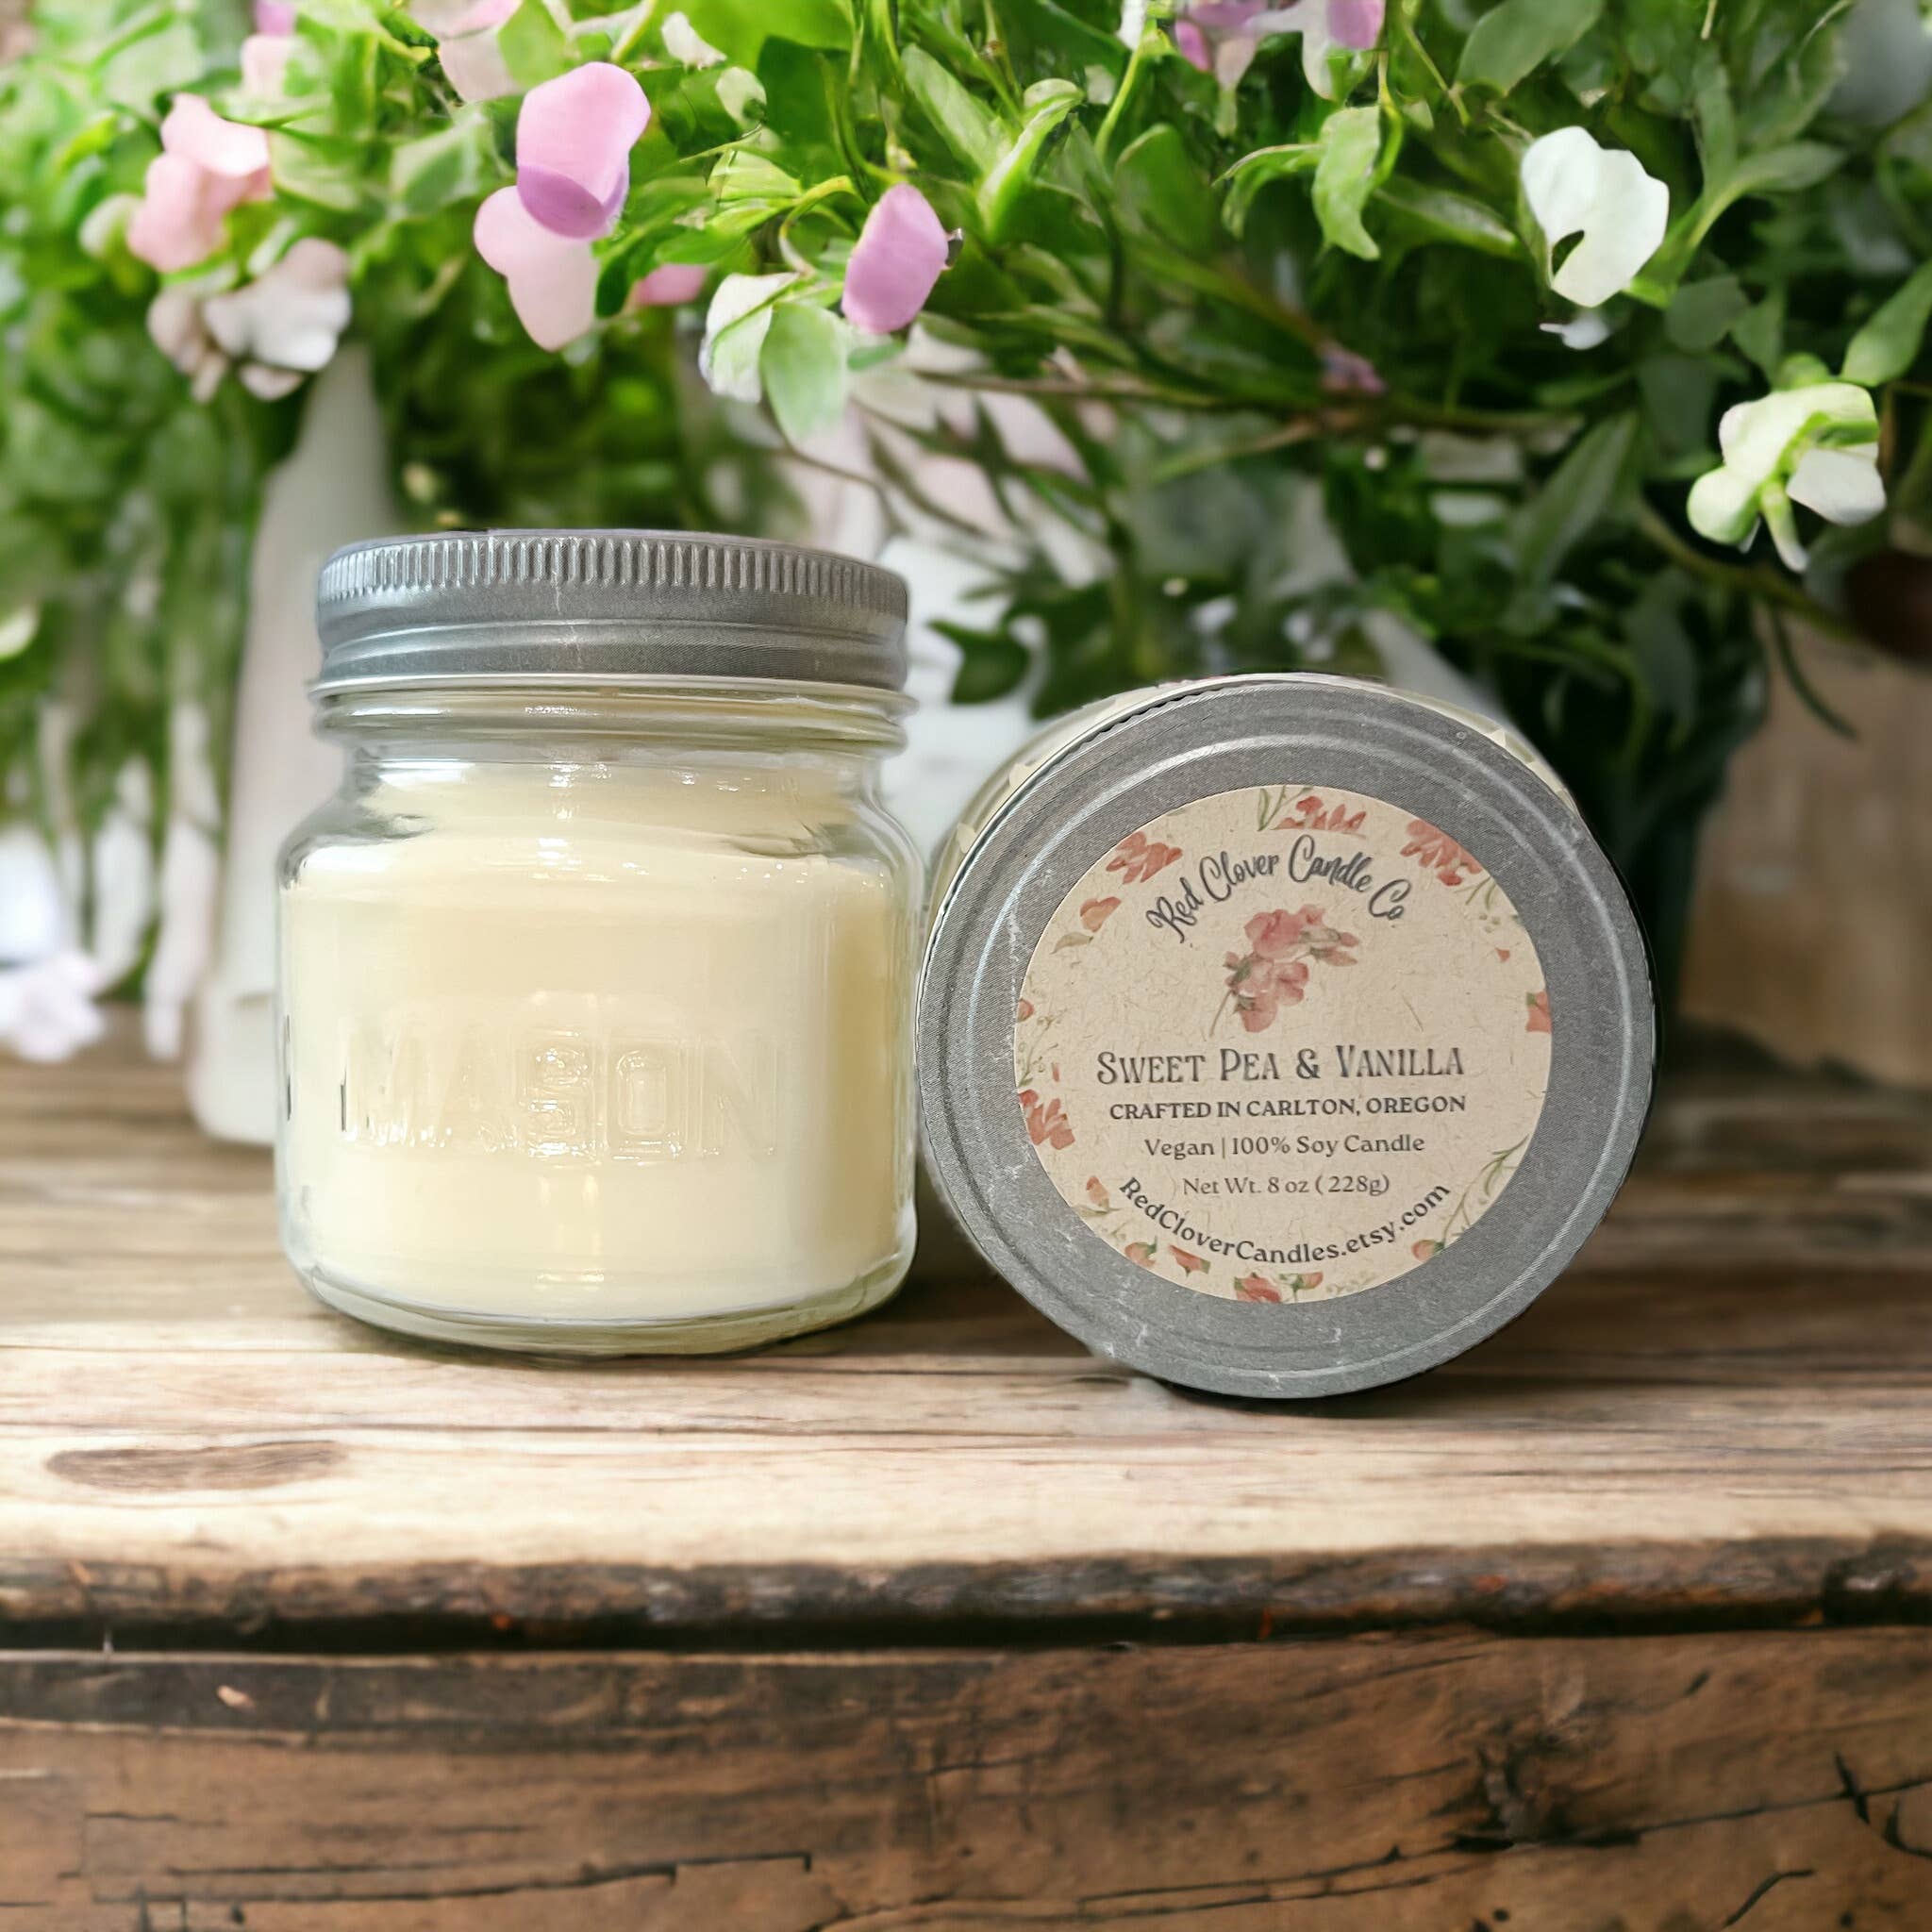 American Soy all Organic Sweet pea Candle in Crock in Grand Rapids